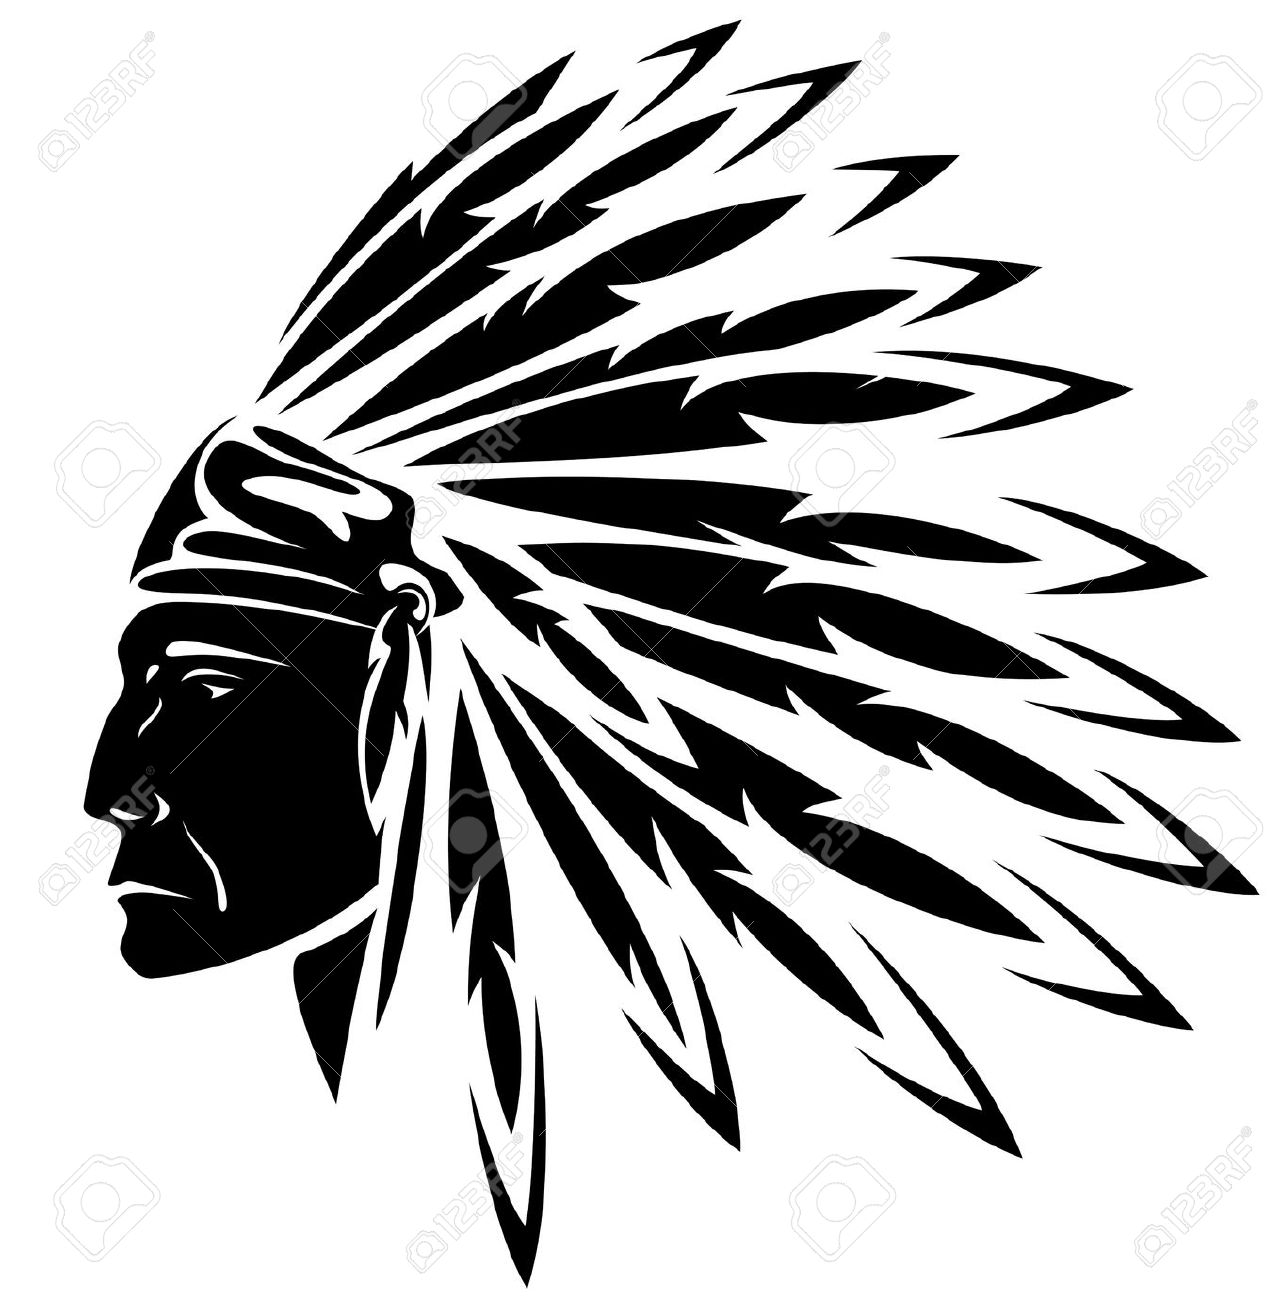 Indian Headdress Clipart & Indian Headdress Clip Art Images.